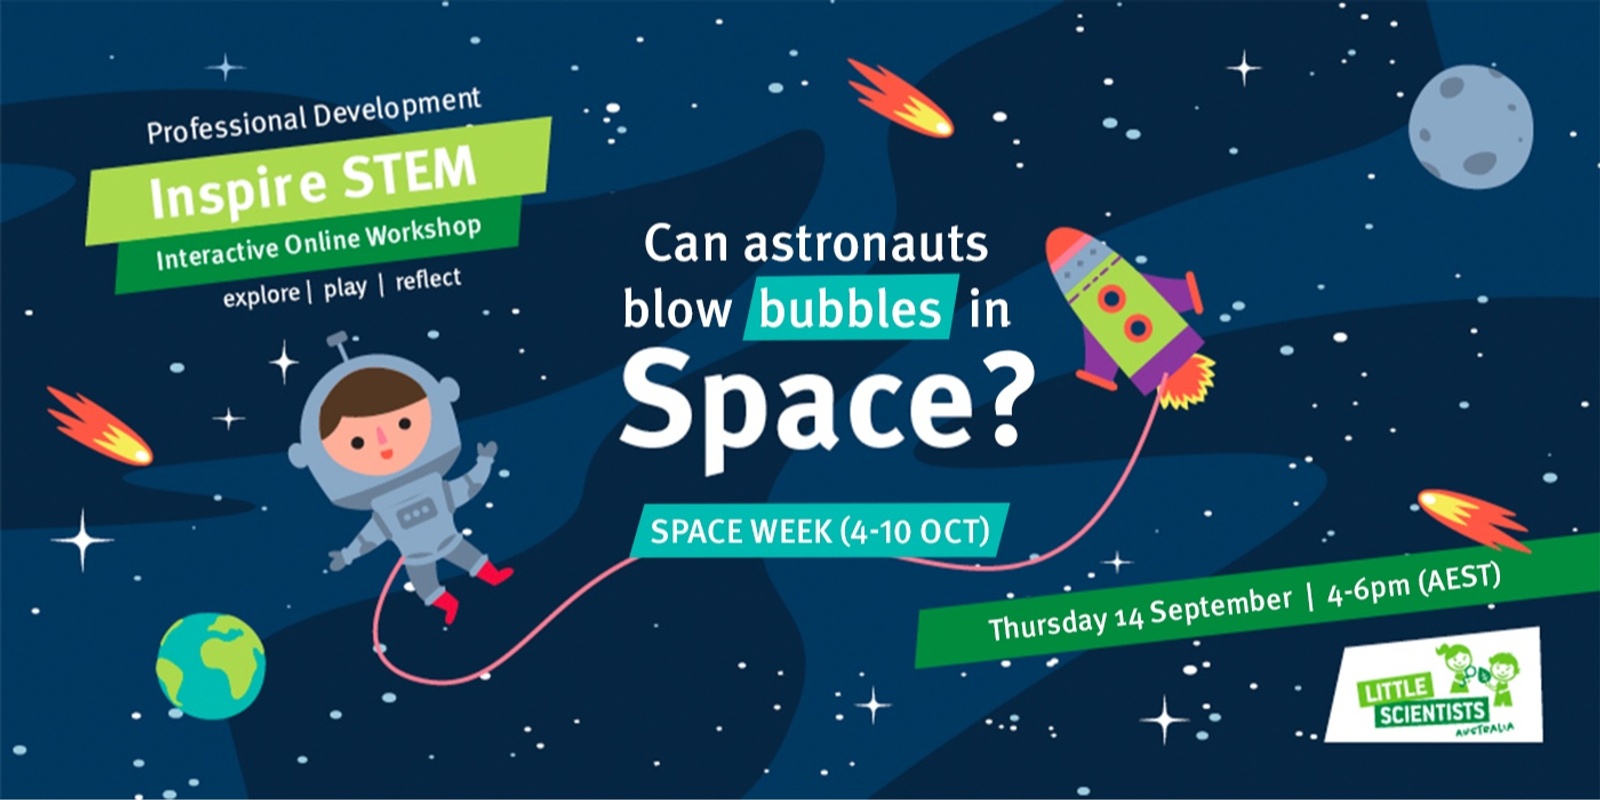 Can　Inspire　Humanitix　Blow　Space?　STEM:　in　Astronauts　Bubbles